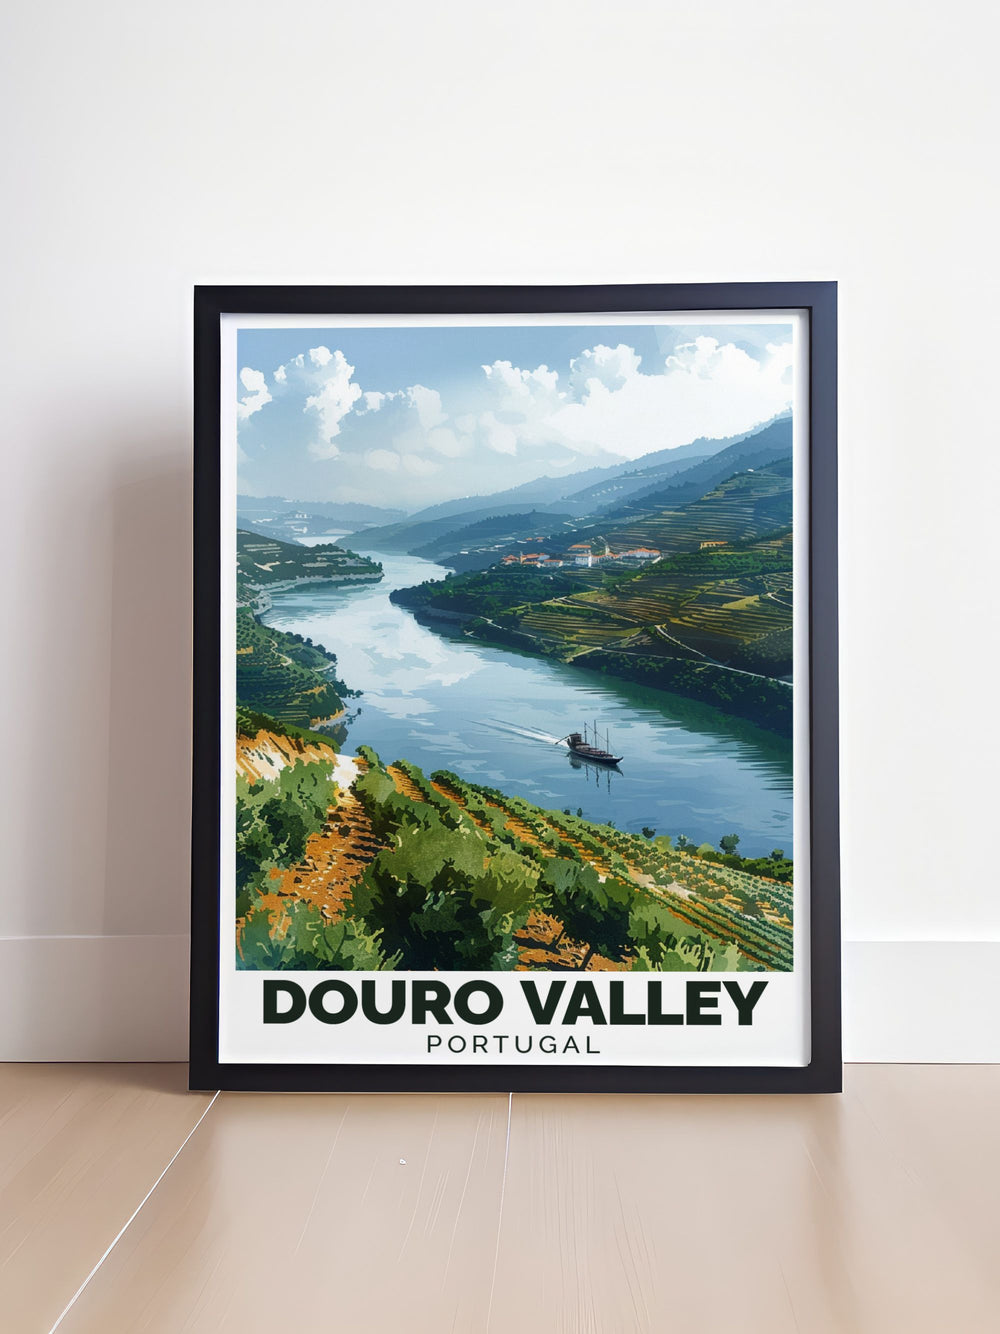 Travel poster of the Douro Valley highlighting the breathtaking views from the terraced vineyards, ideal for adventure enthusiasts and wine lovers.